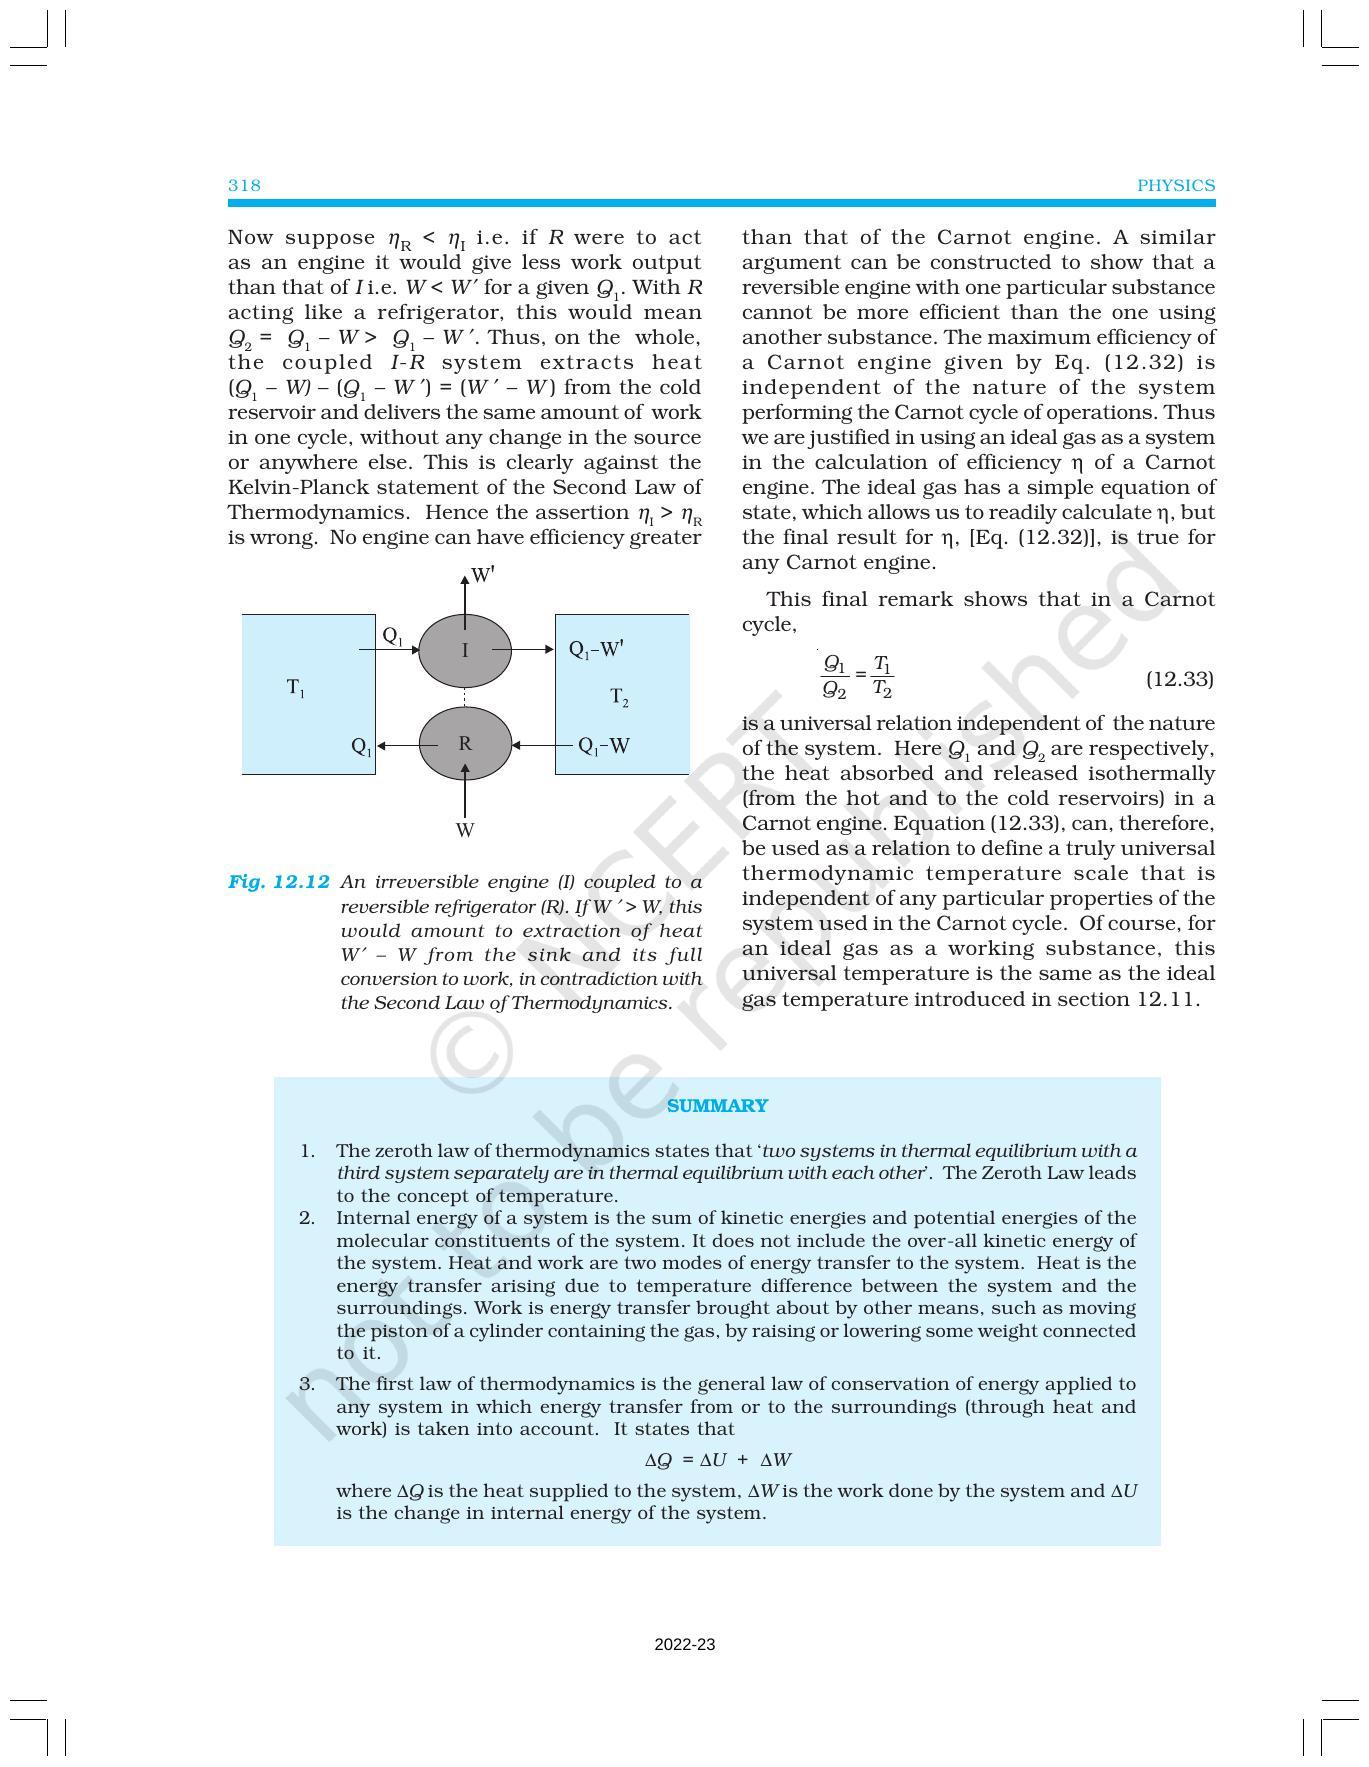 NCERT Book for Class 11 Physics Chapter 12 Thermodynamics - Page 16